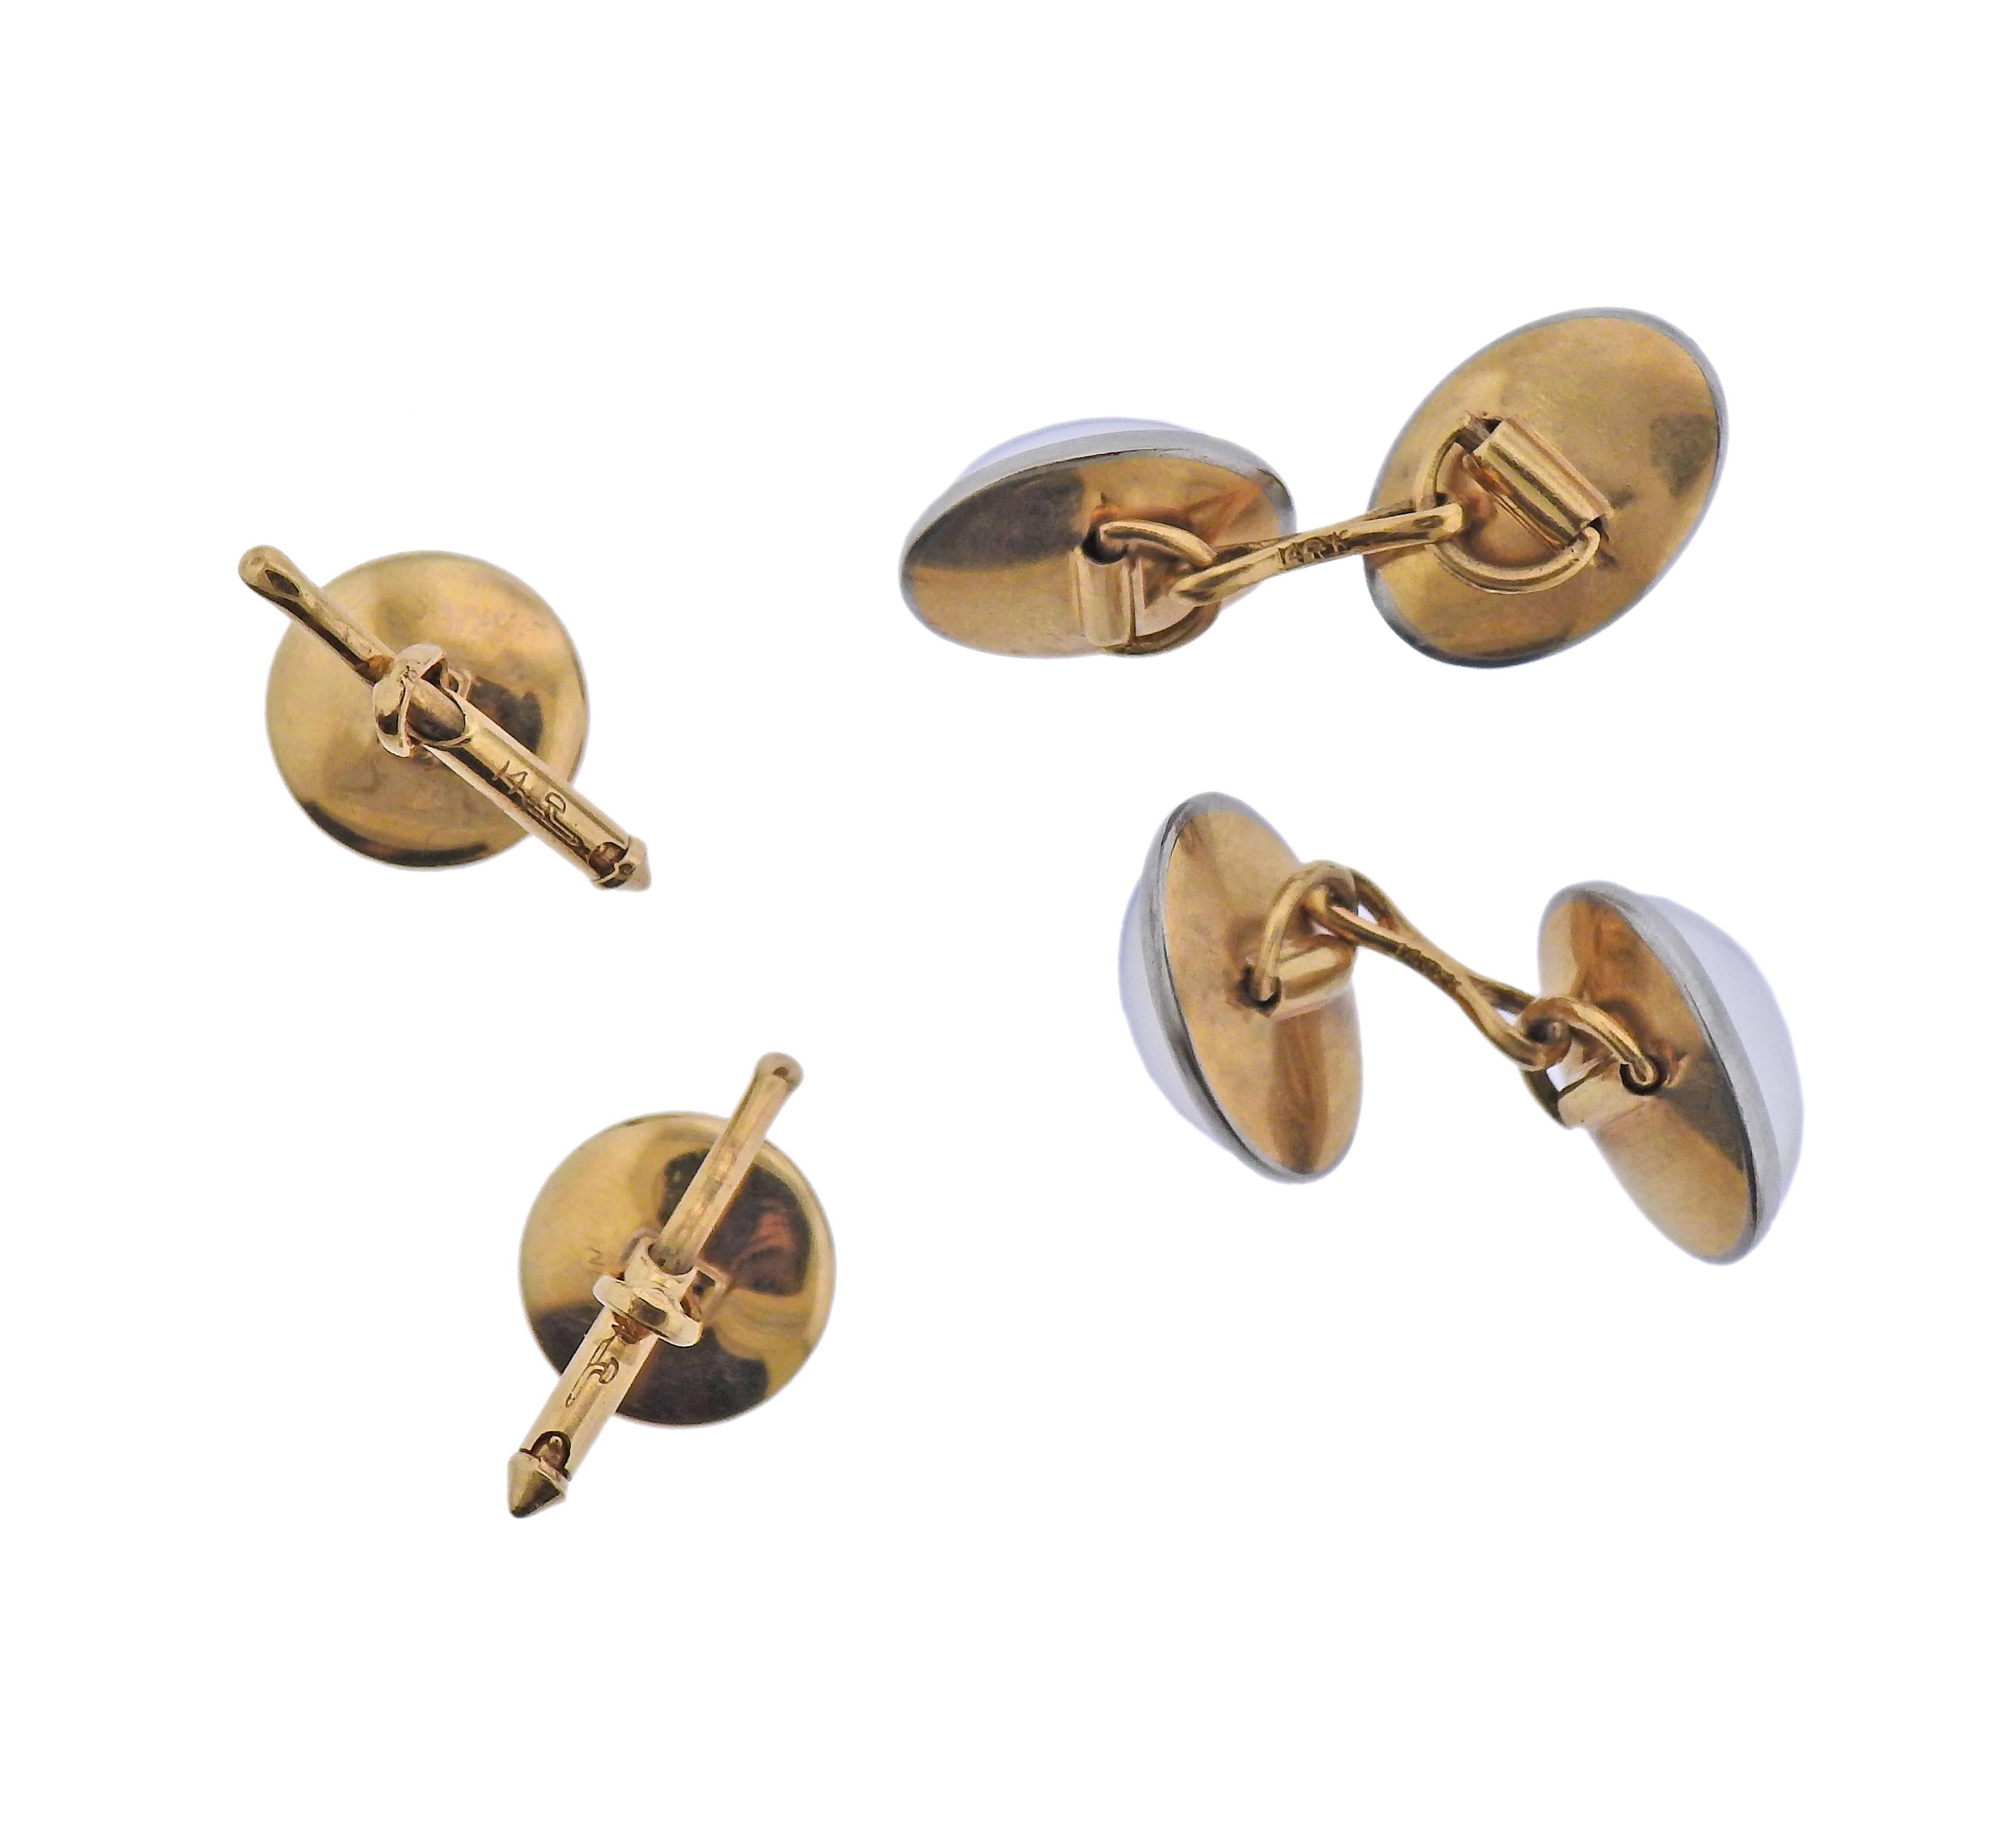 retro 14k gold cufflinks and studs set, with moonstone cabochons. Cufflink top is 15.5mm x 11.5mm and stud top is 12mm in diameter. Marked 14k. Weight - 15 grams. 